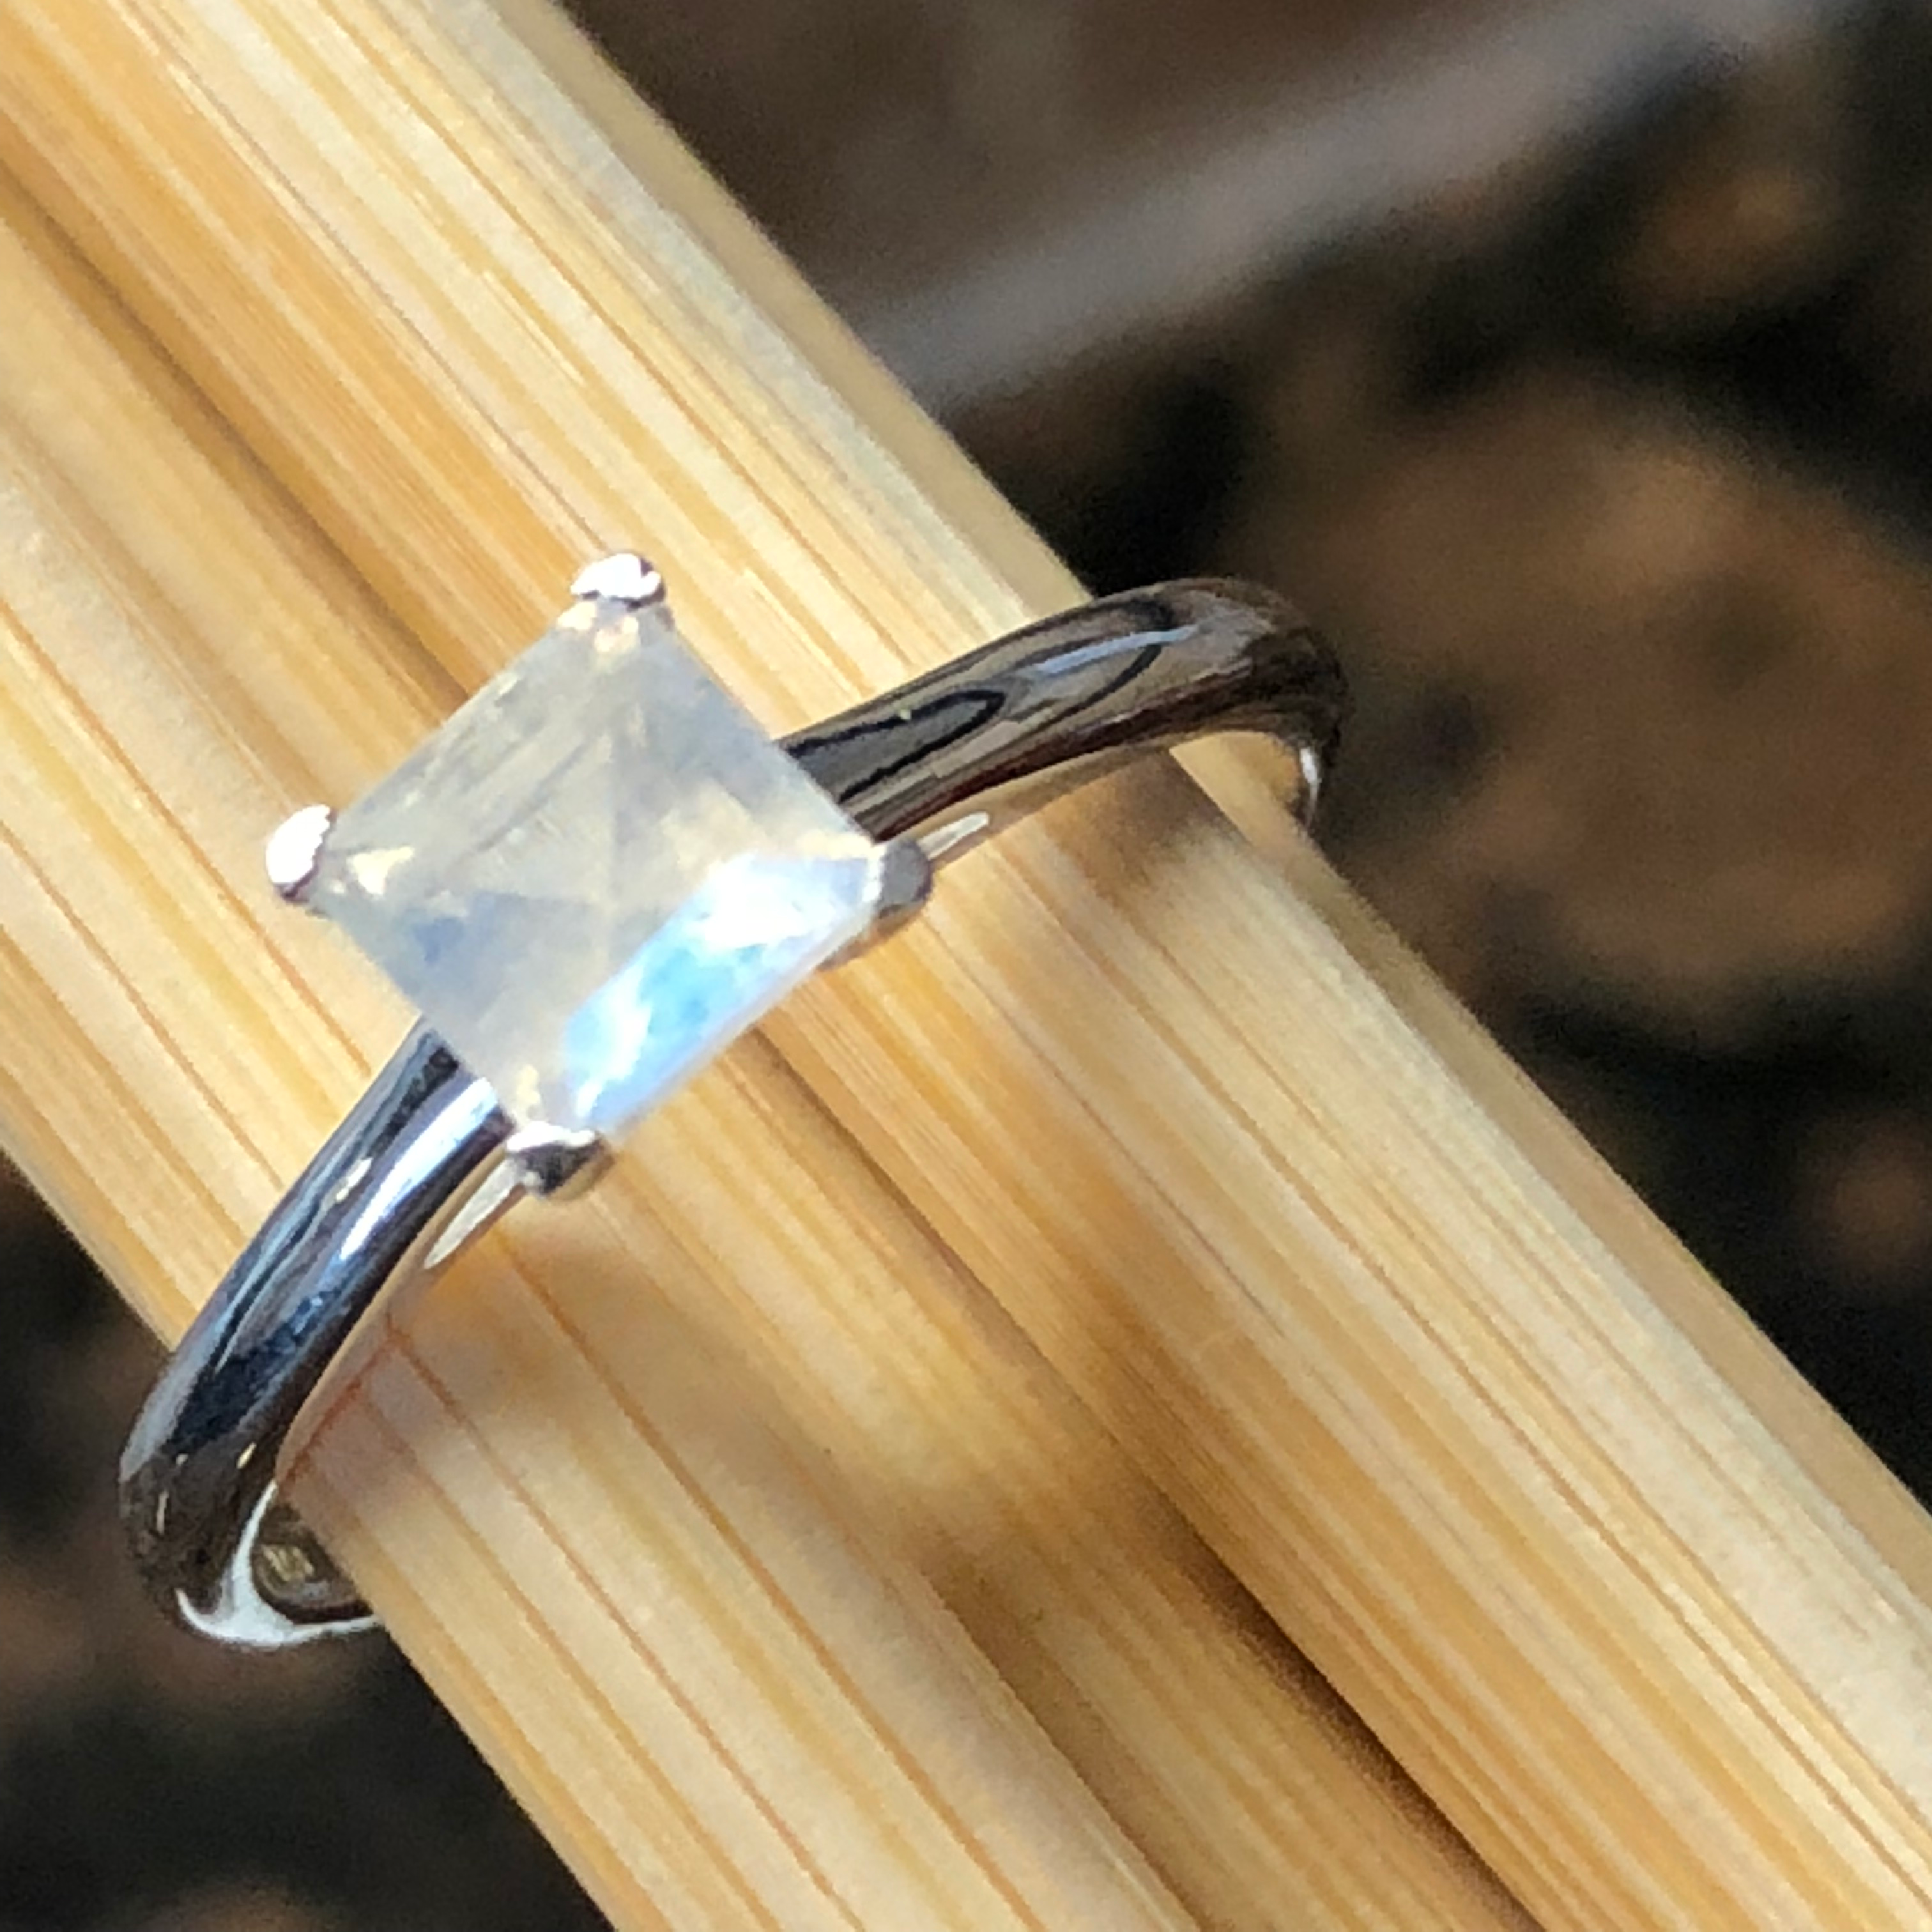 Genuine Rainbow Moonstone 925 Solid Sterling Silver Engagement Ring Size 6, 7, 9, 10 - Natural Rocks by Kala